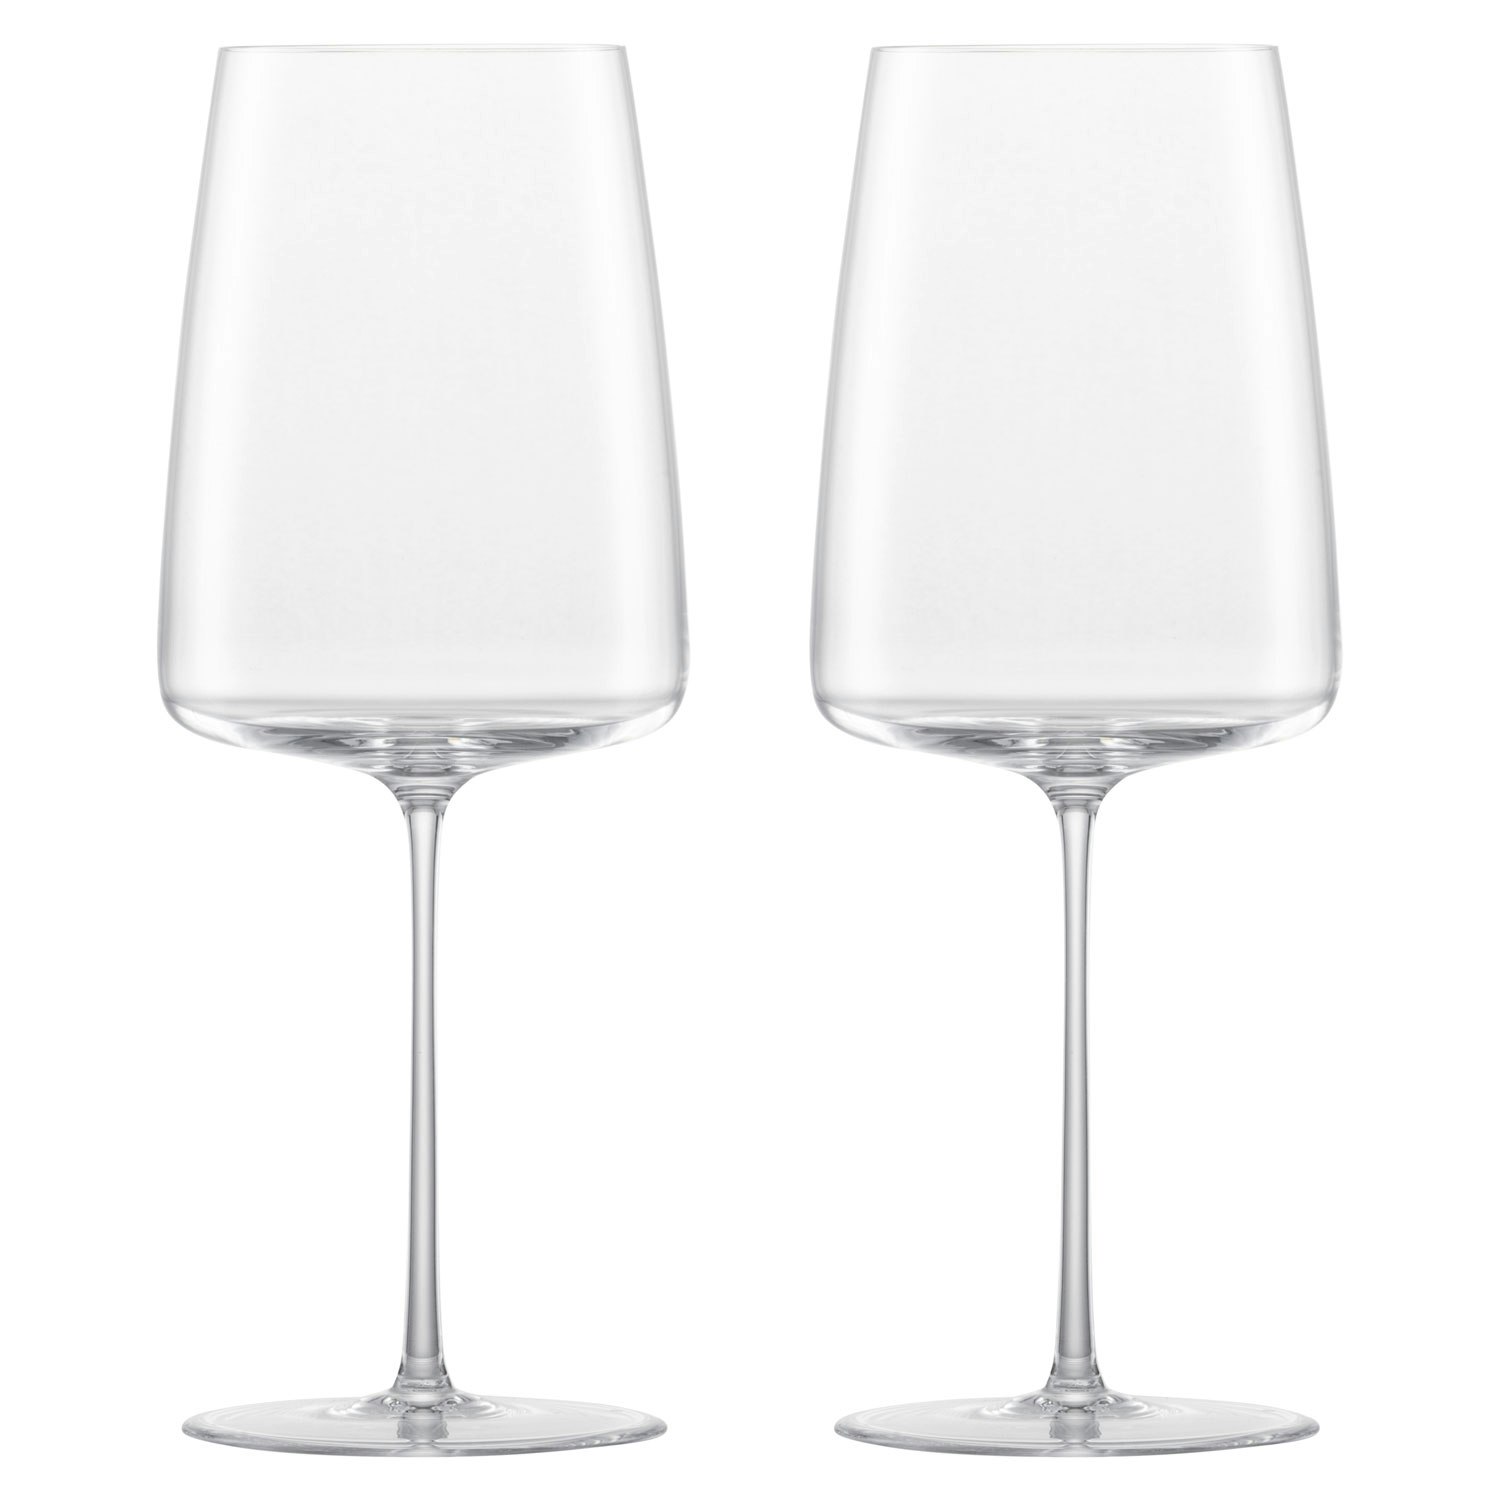 https://royaldesign.com/image/11/zwiesel-simplify-fruity-delicate-wine-glass-55-cl-2-pack-0